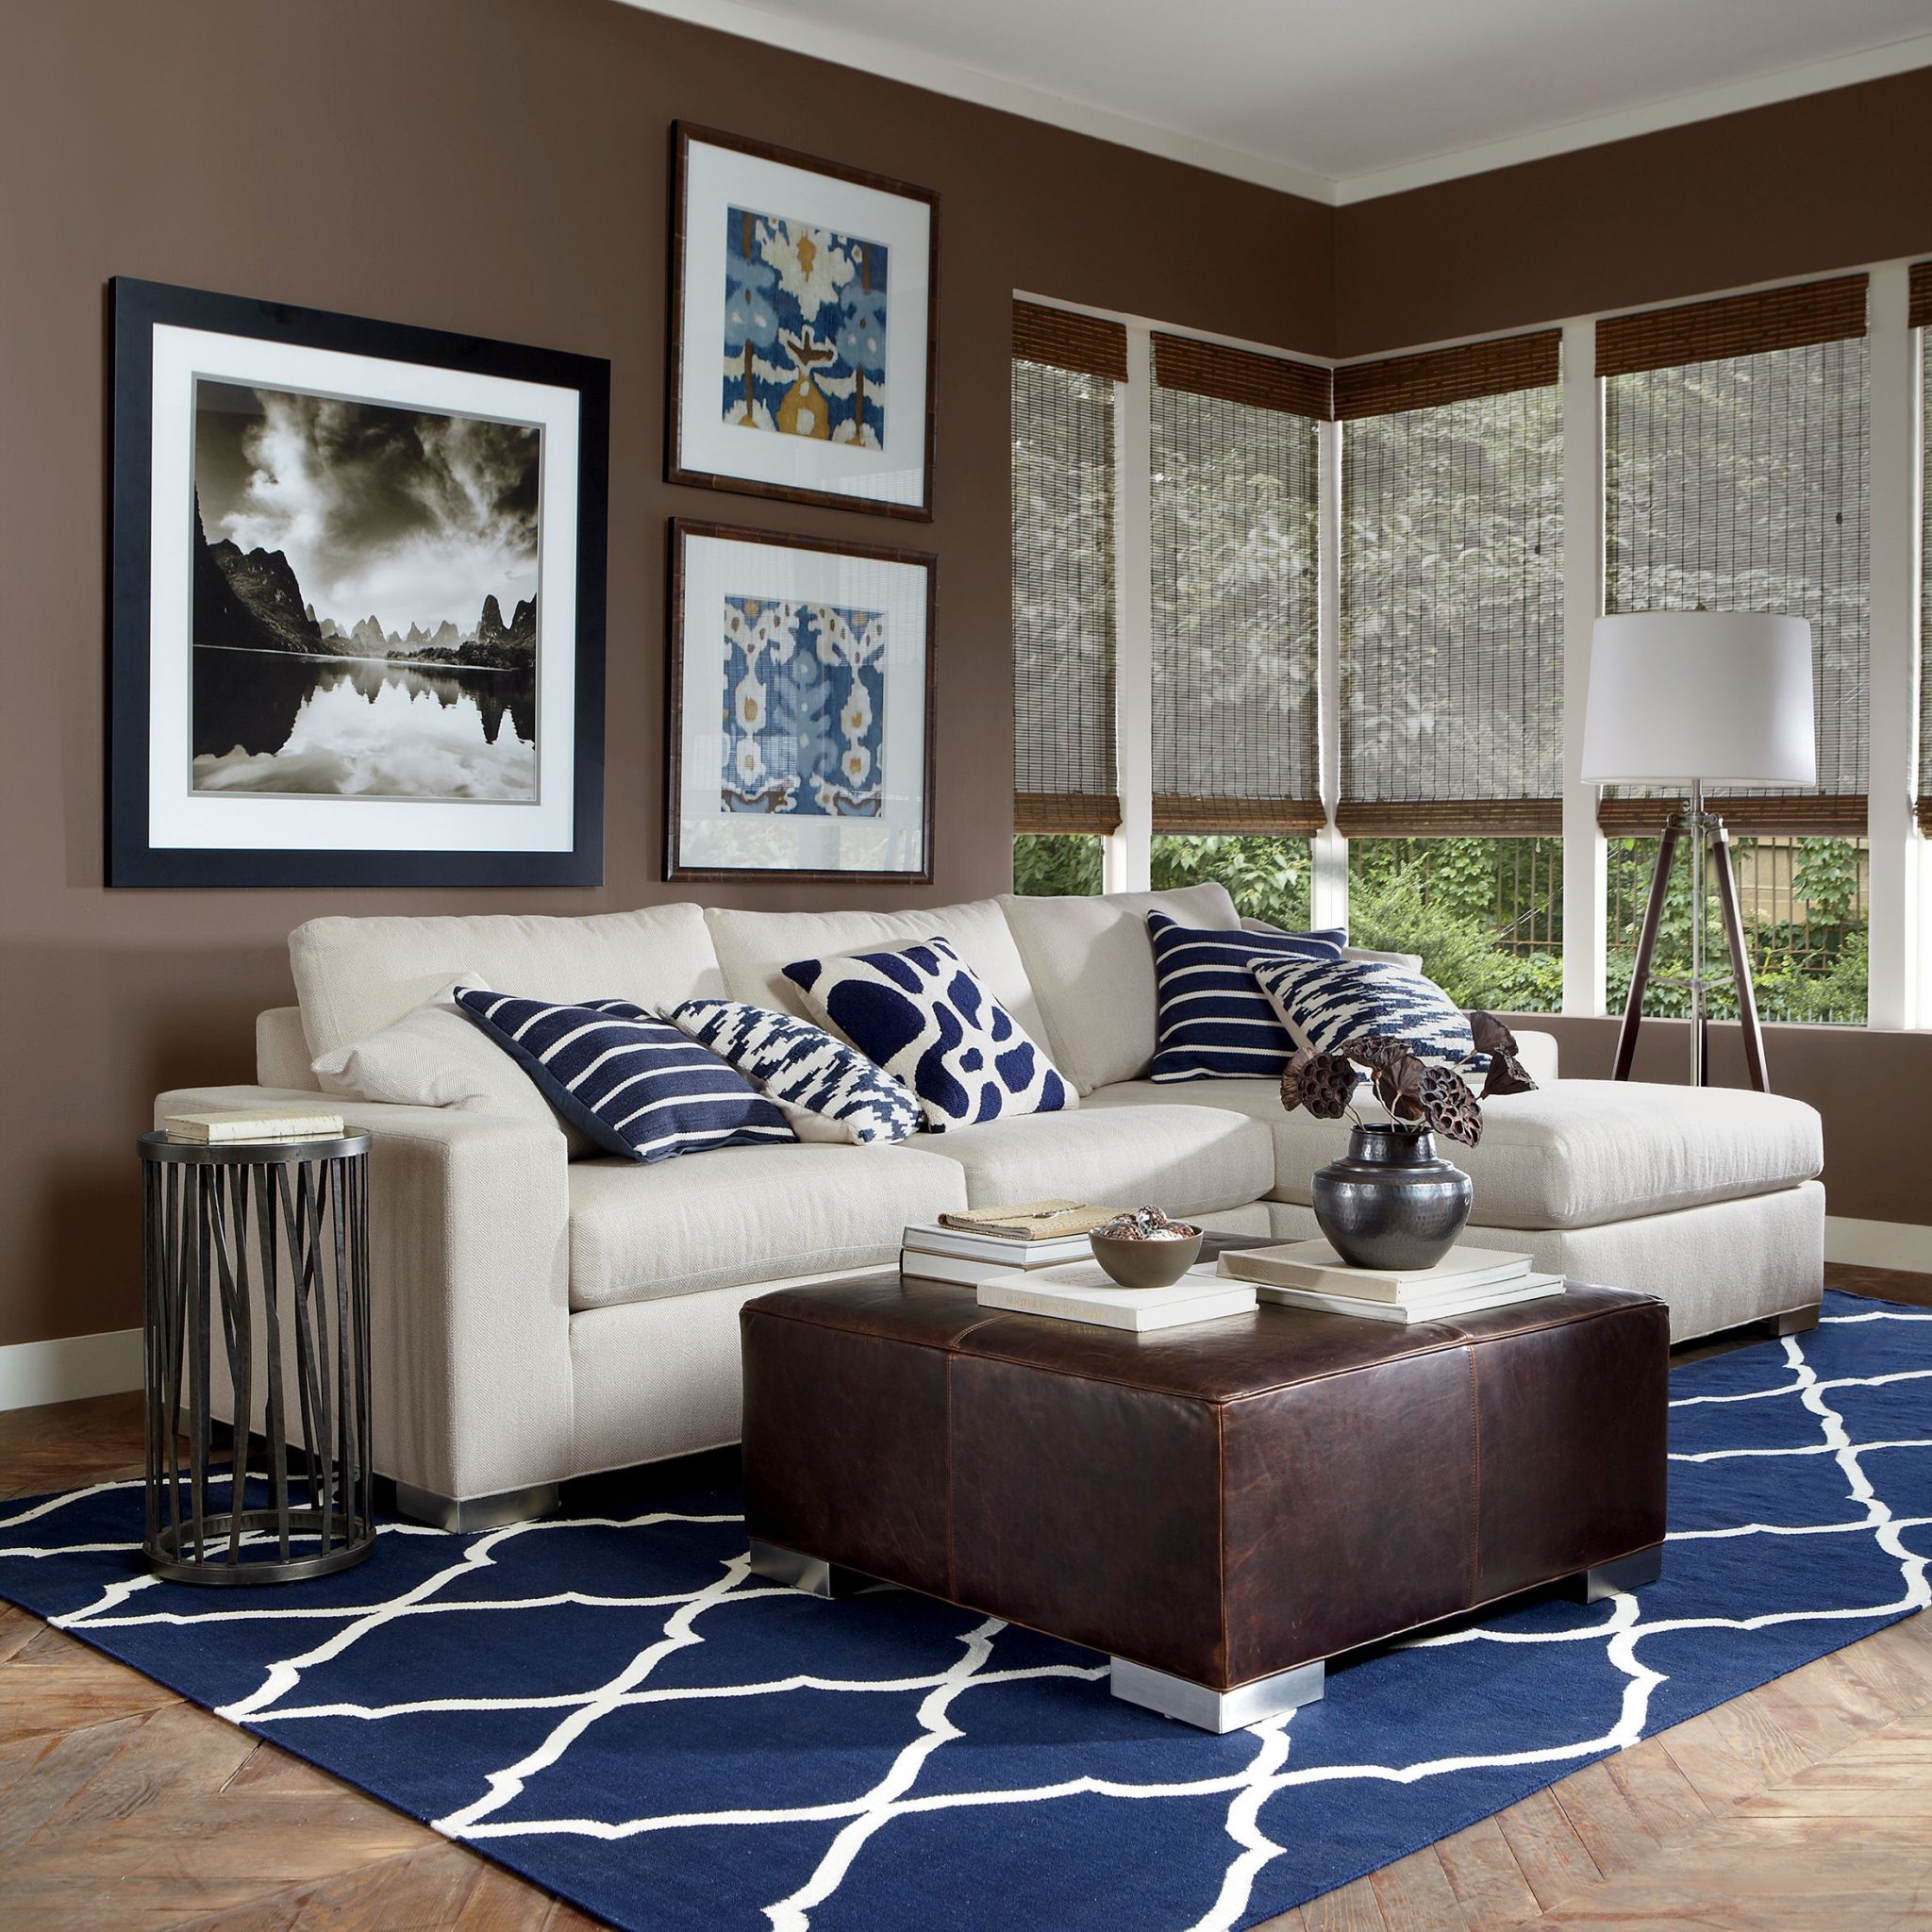 Cool blue and brown living room